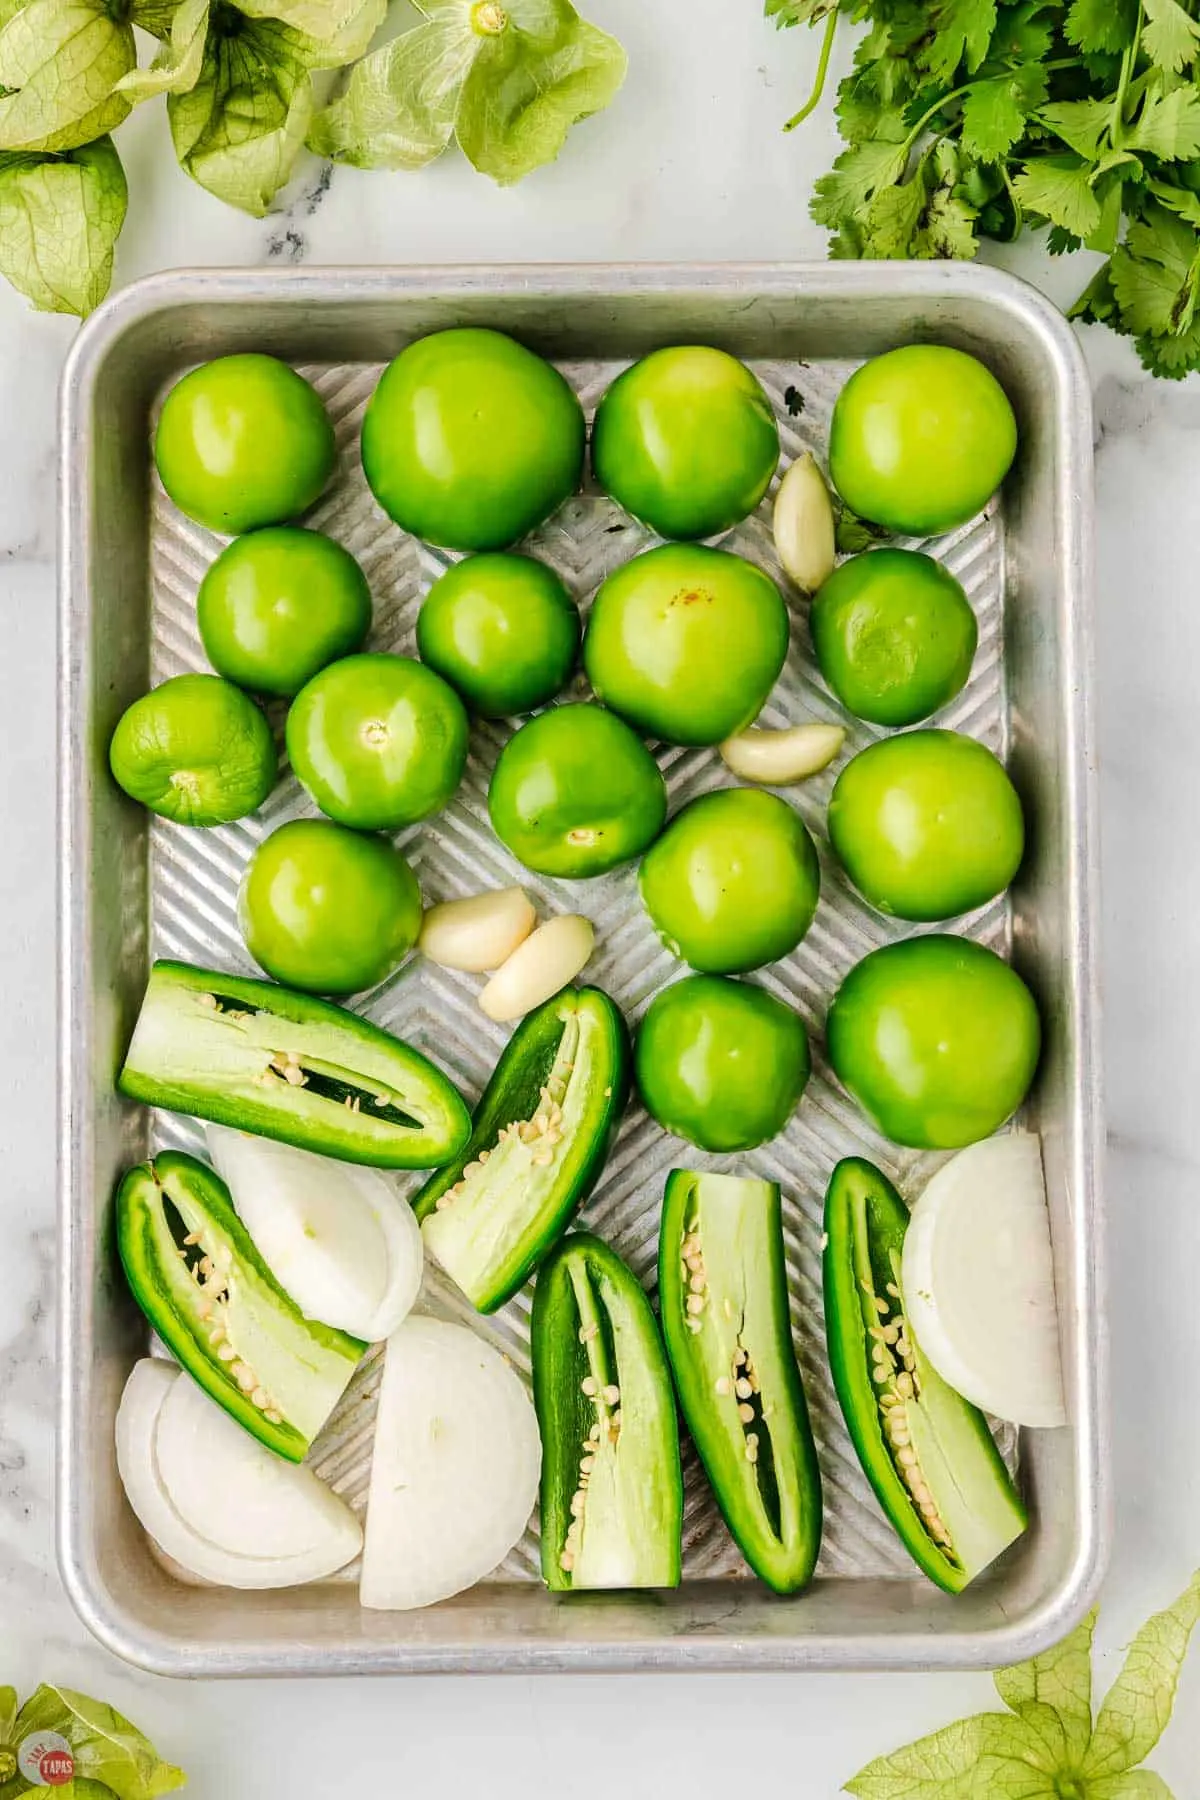 wash tomatillos and place on a rimmed baking sheet with onions and jalapeno peppers